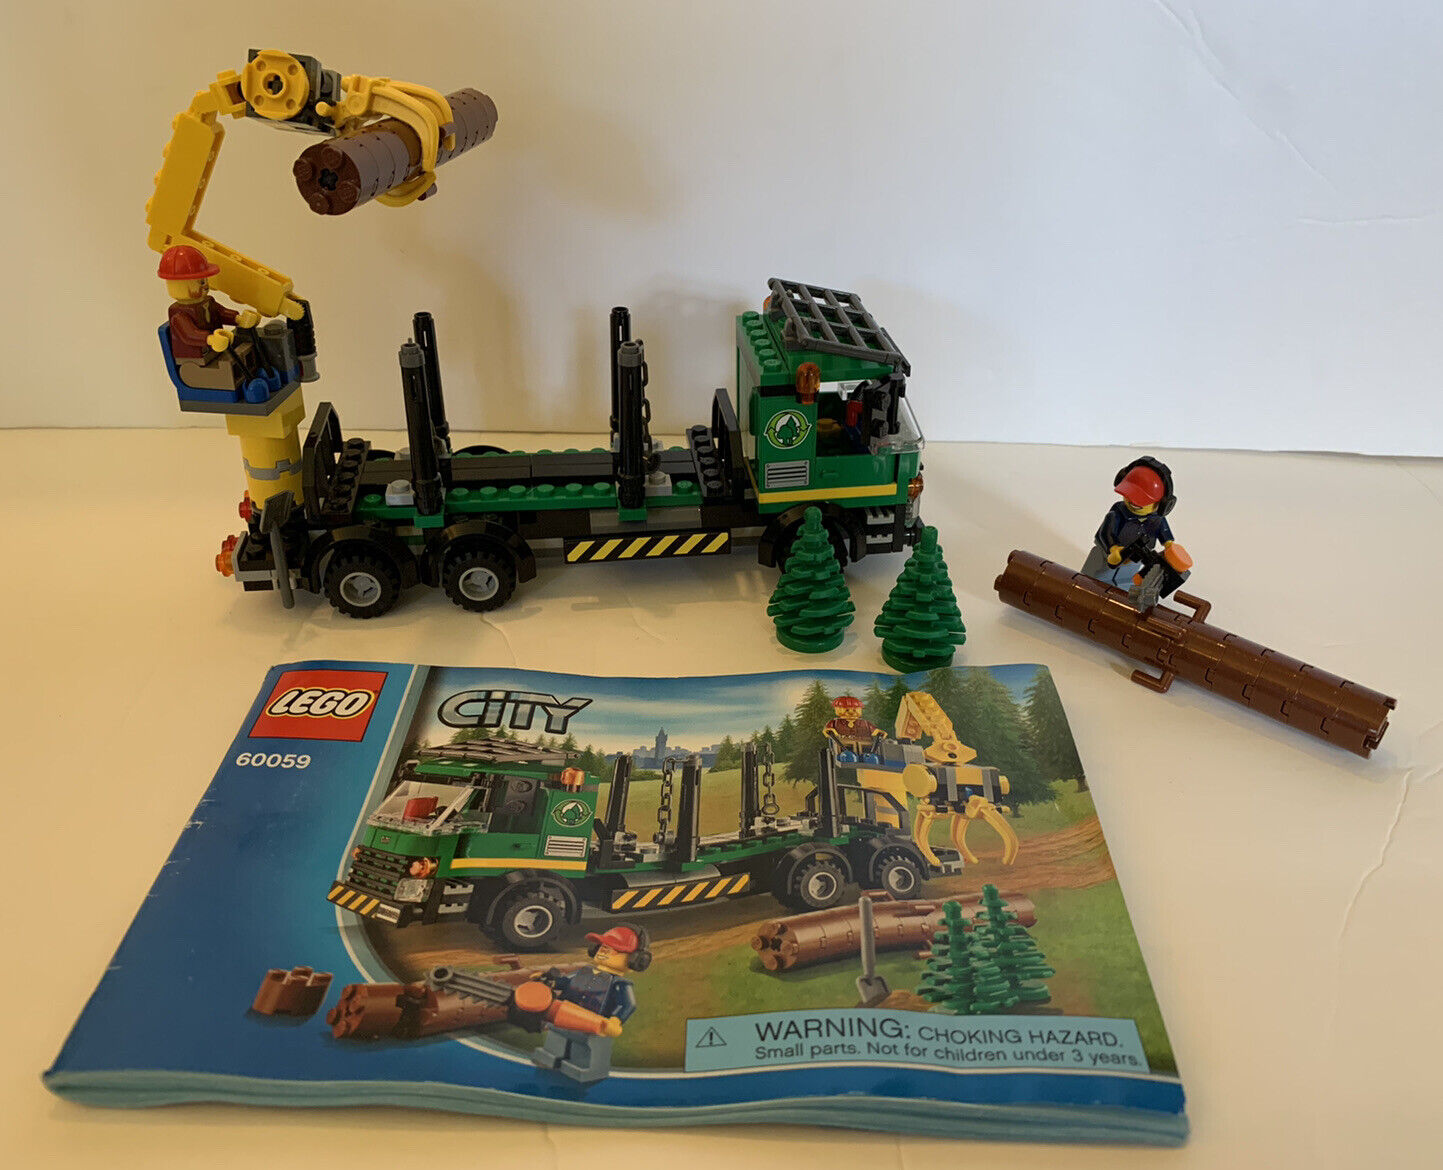 LEGO City Logging Truck #60059 100% Complete With Instructions & Minifigures